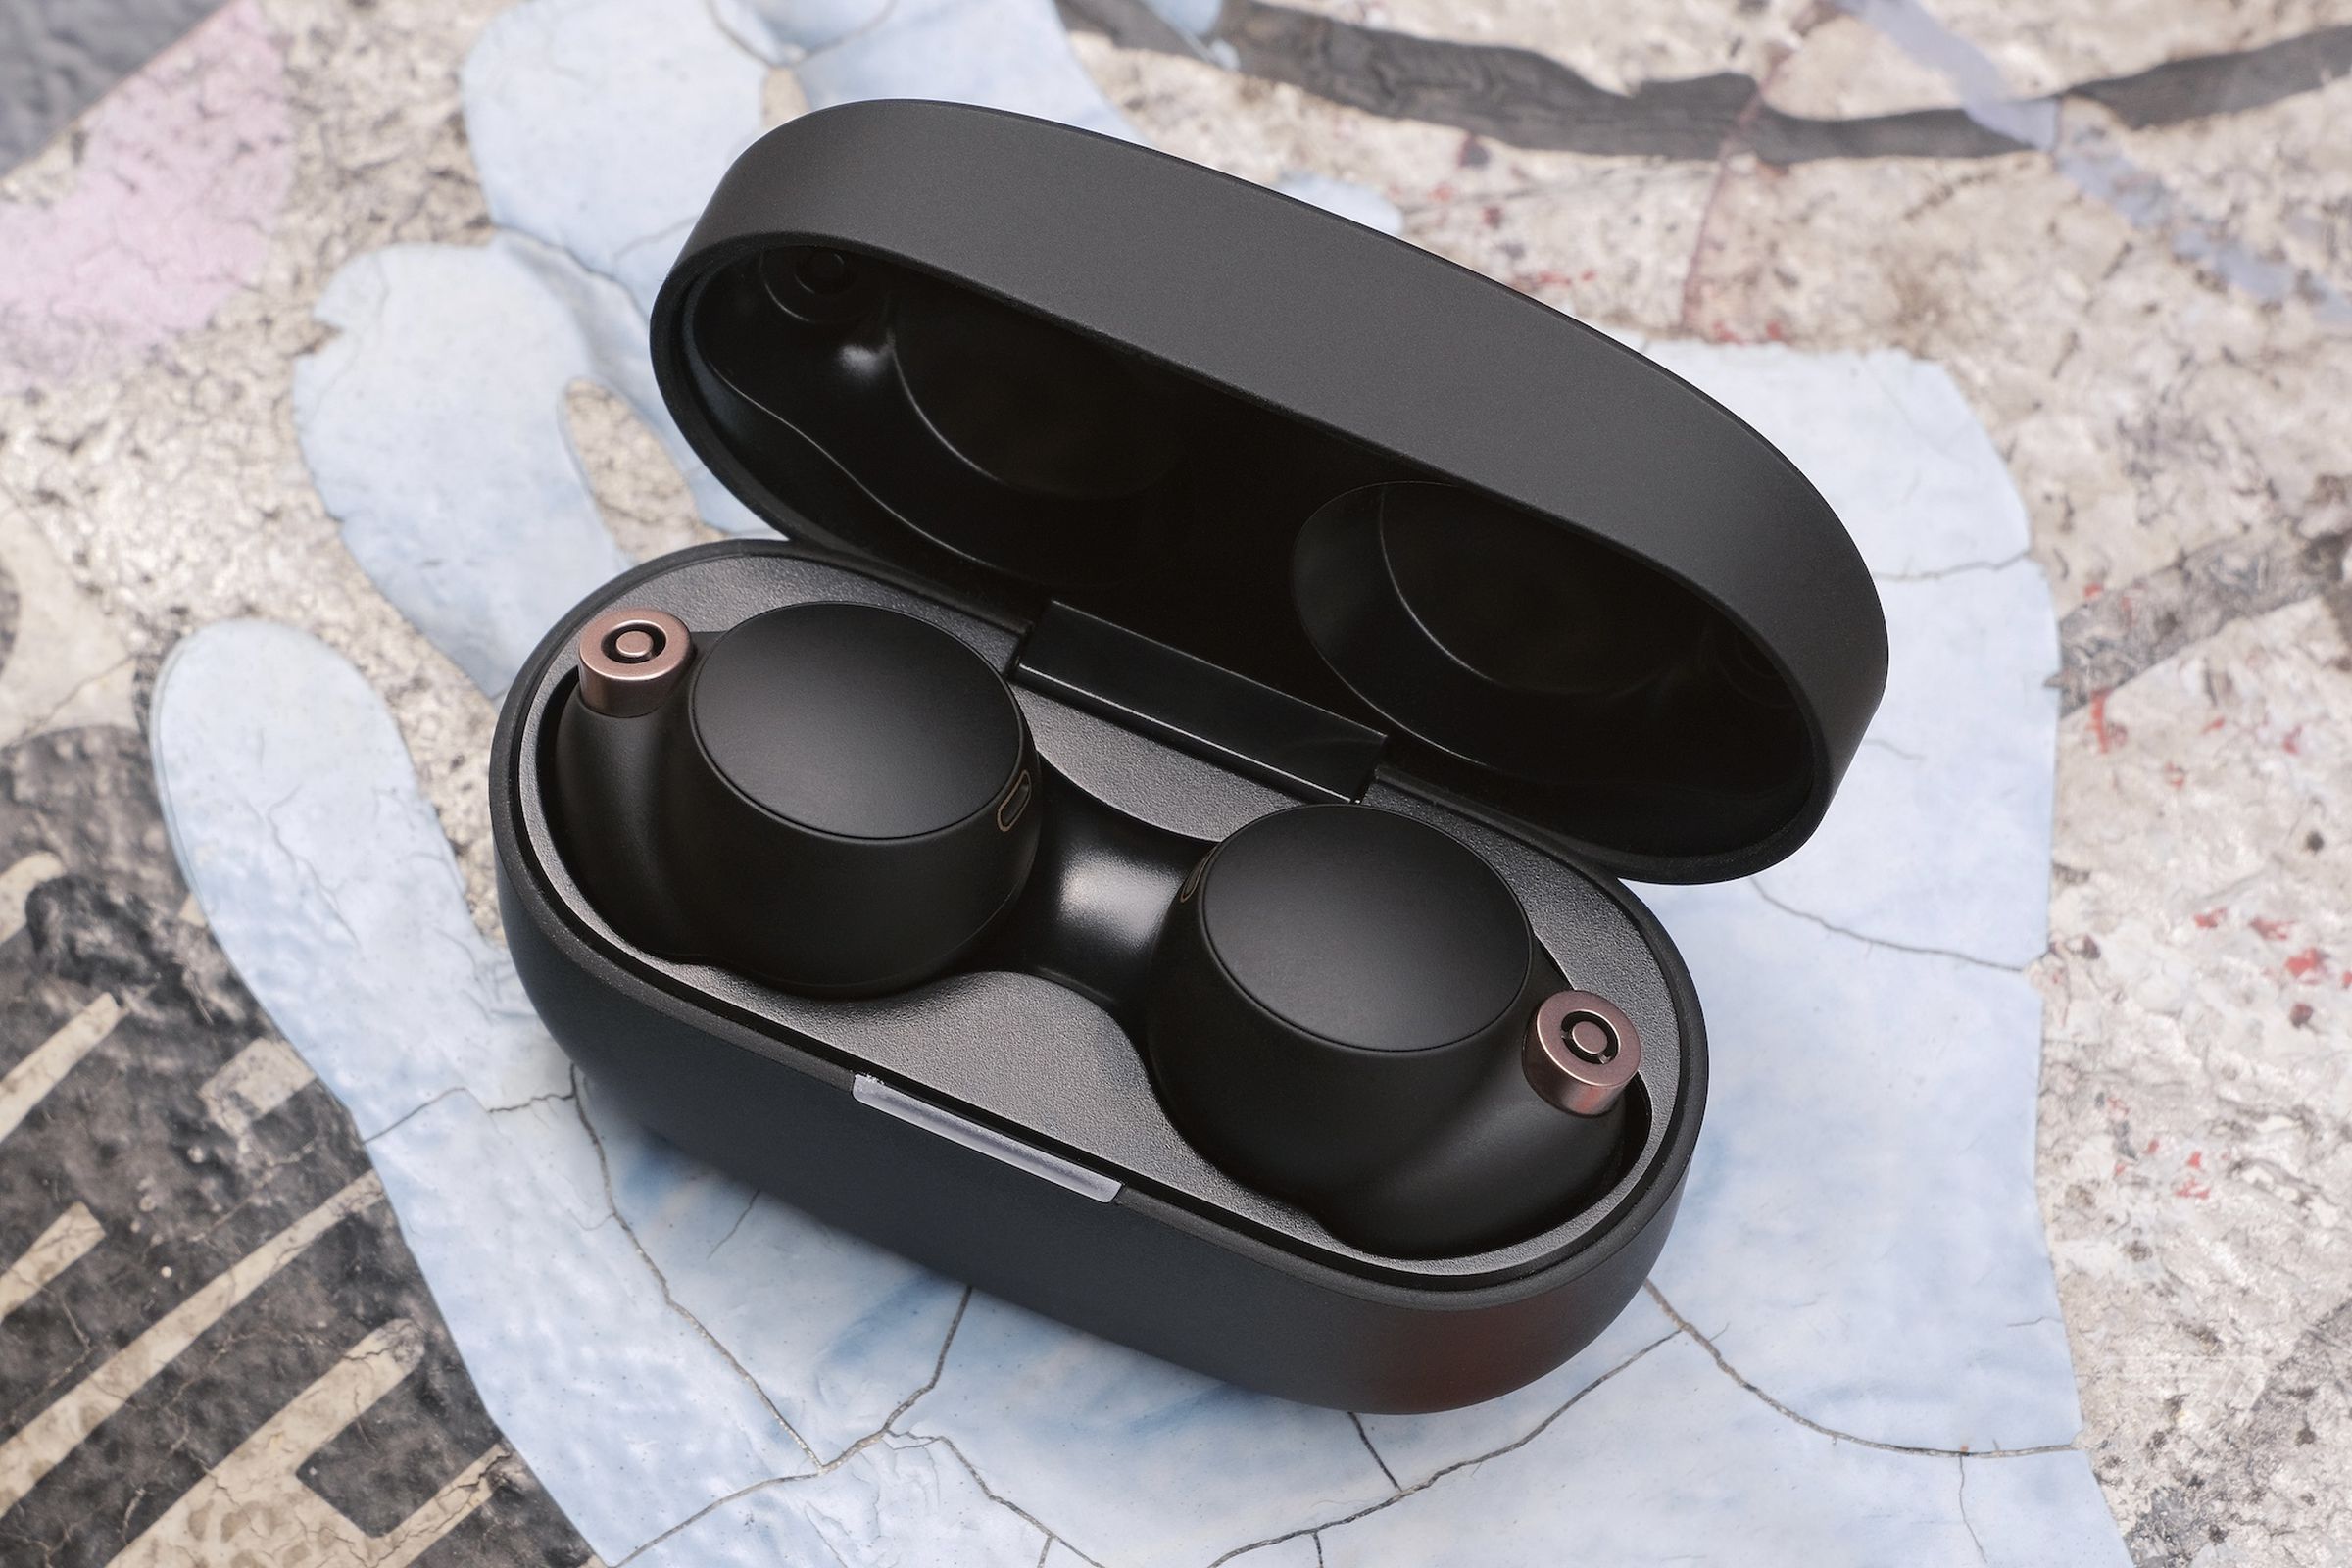 Sony’s WF-1000XM4, the best true wireless earbuds you can buy, are still on sale for $248.